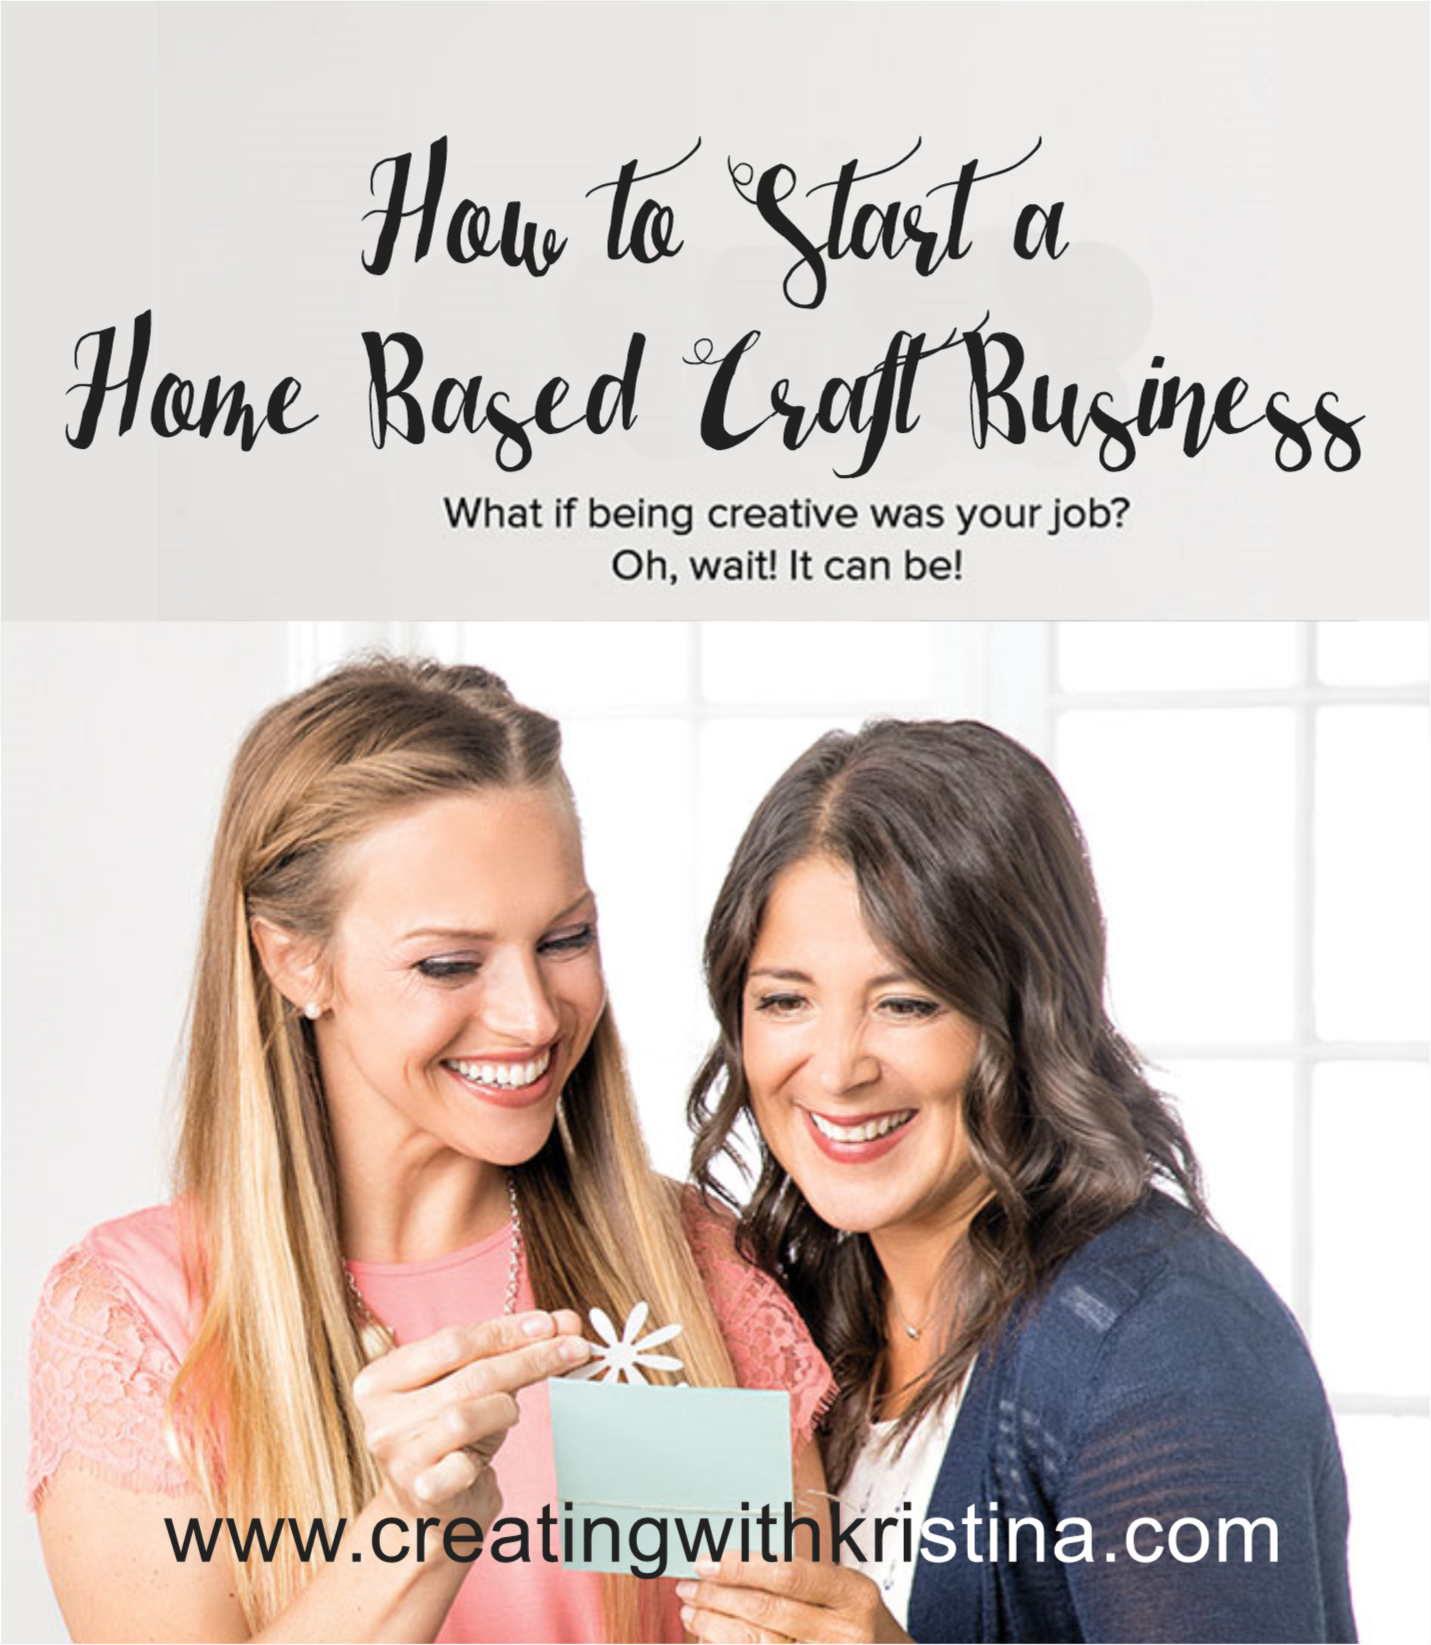 Business Idea for Empty Nesters - A Home-based Craft Business